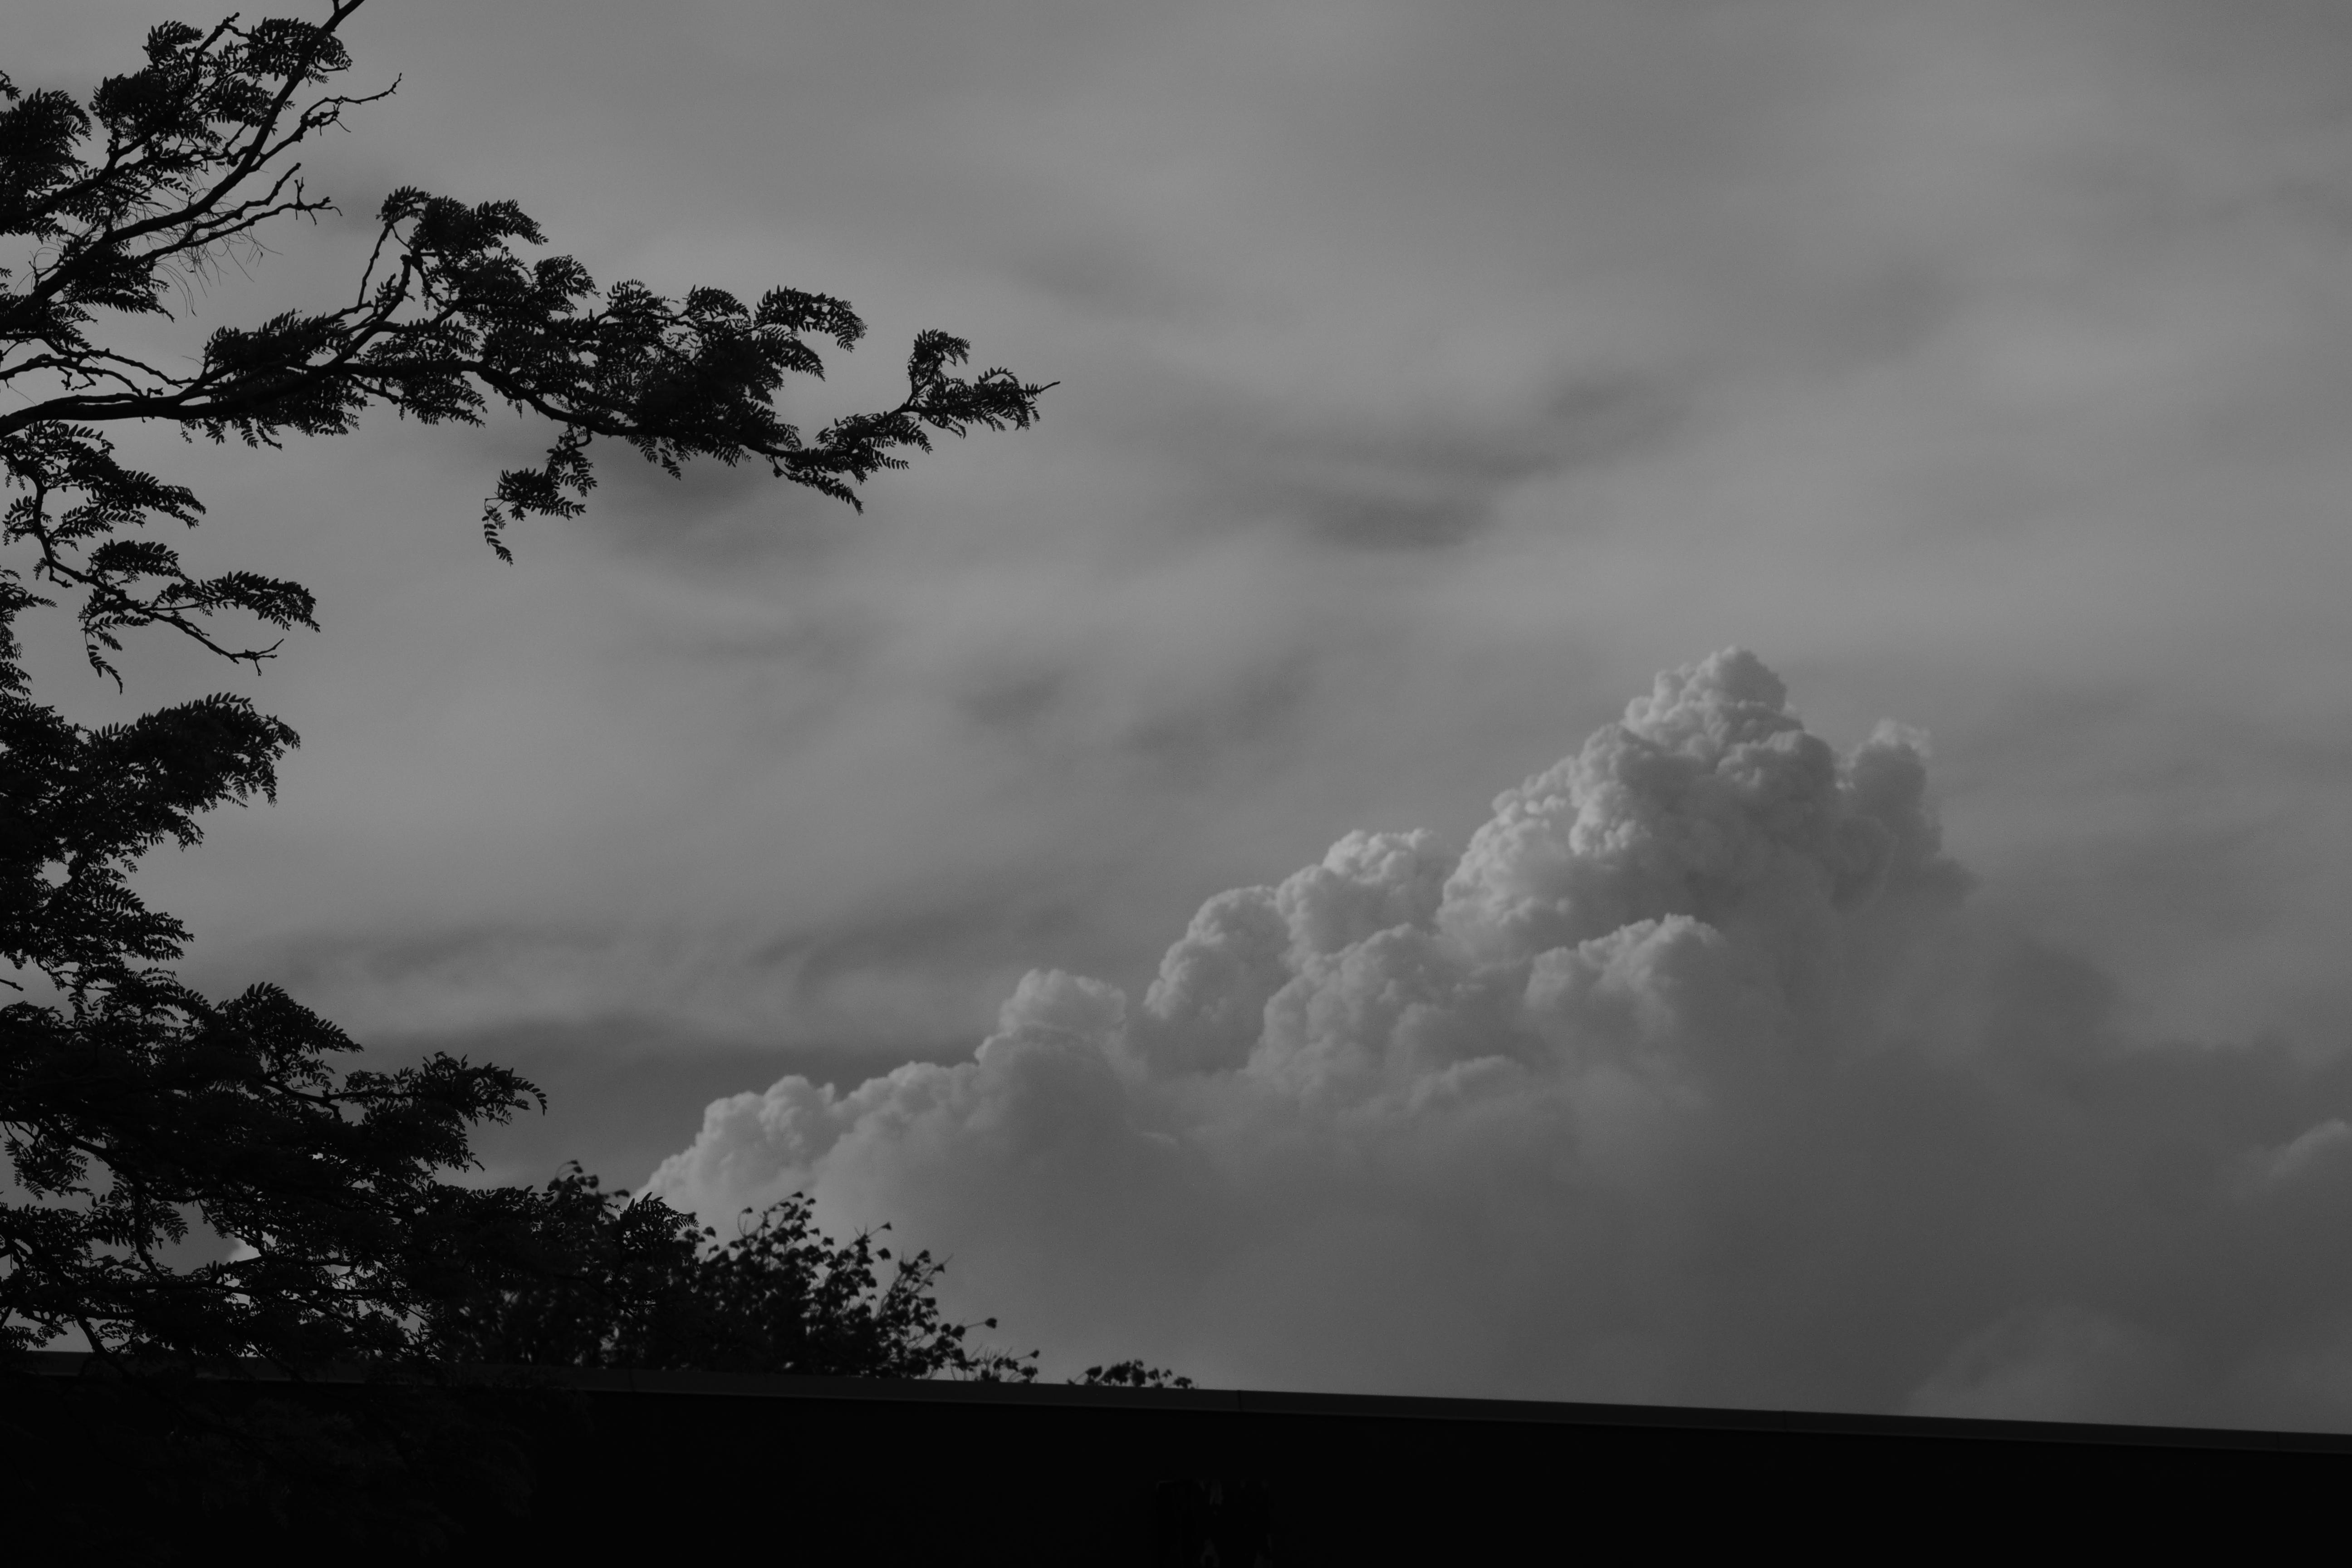 A massive pyrocumulous cloud is visible above the top of a building. The branches of a tree are visible at the left side of the picture.